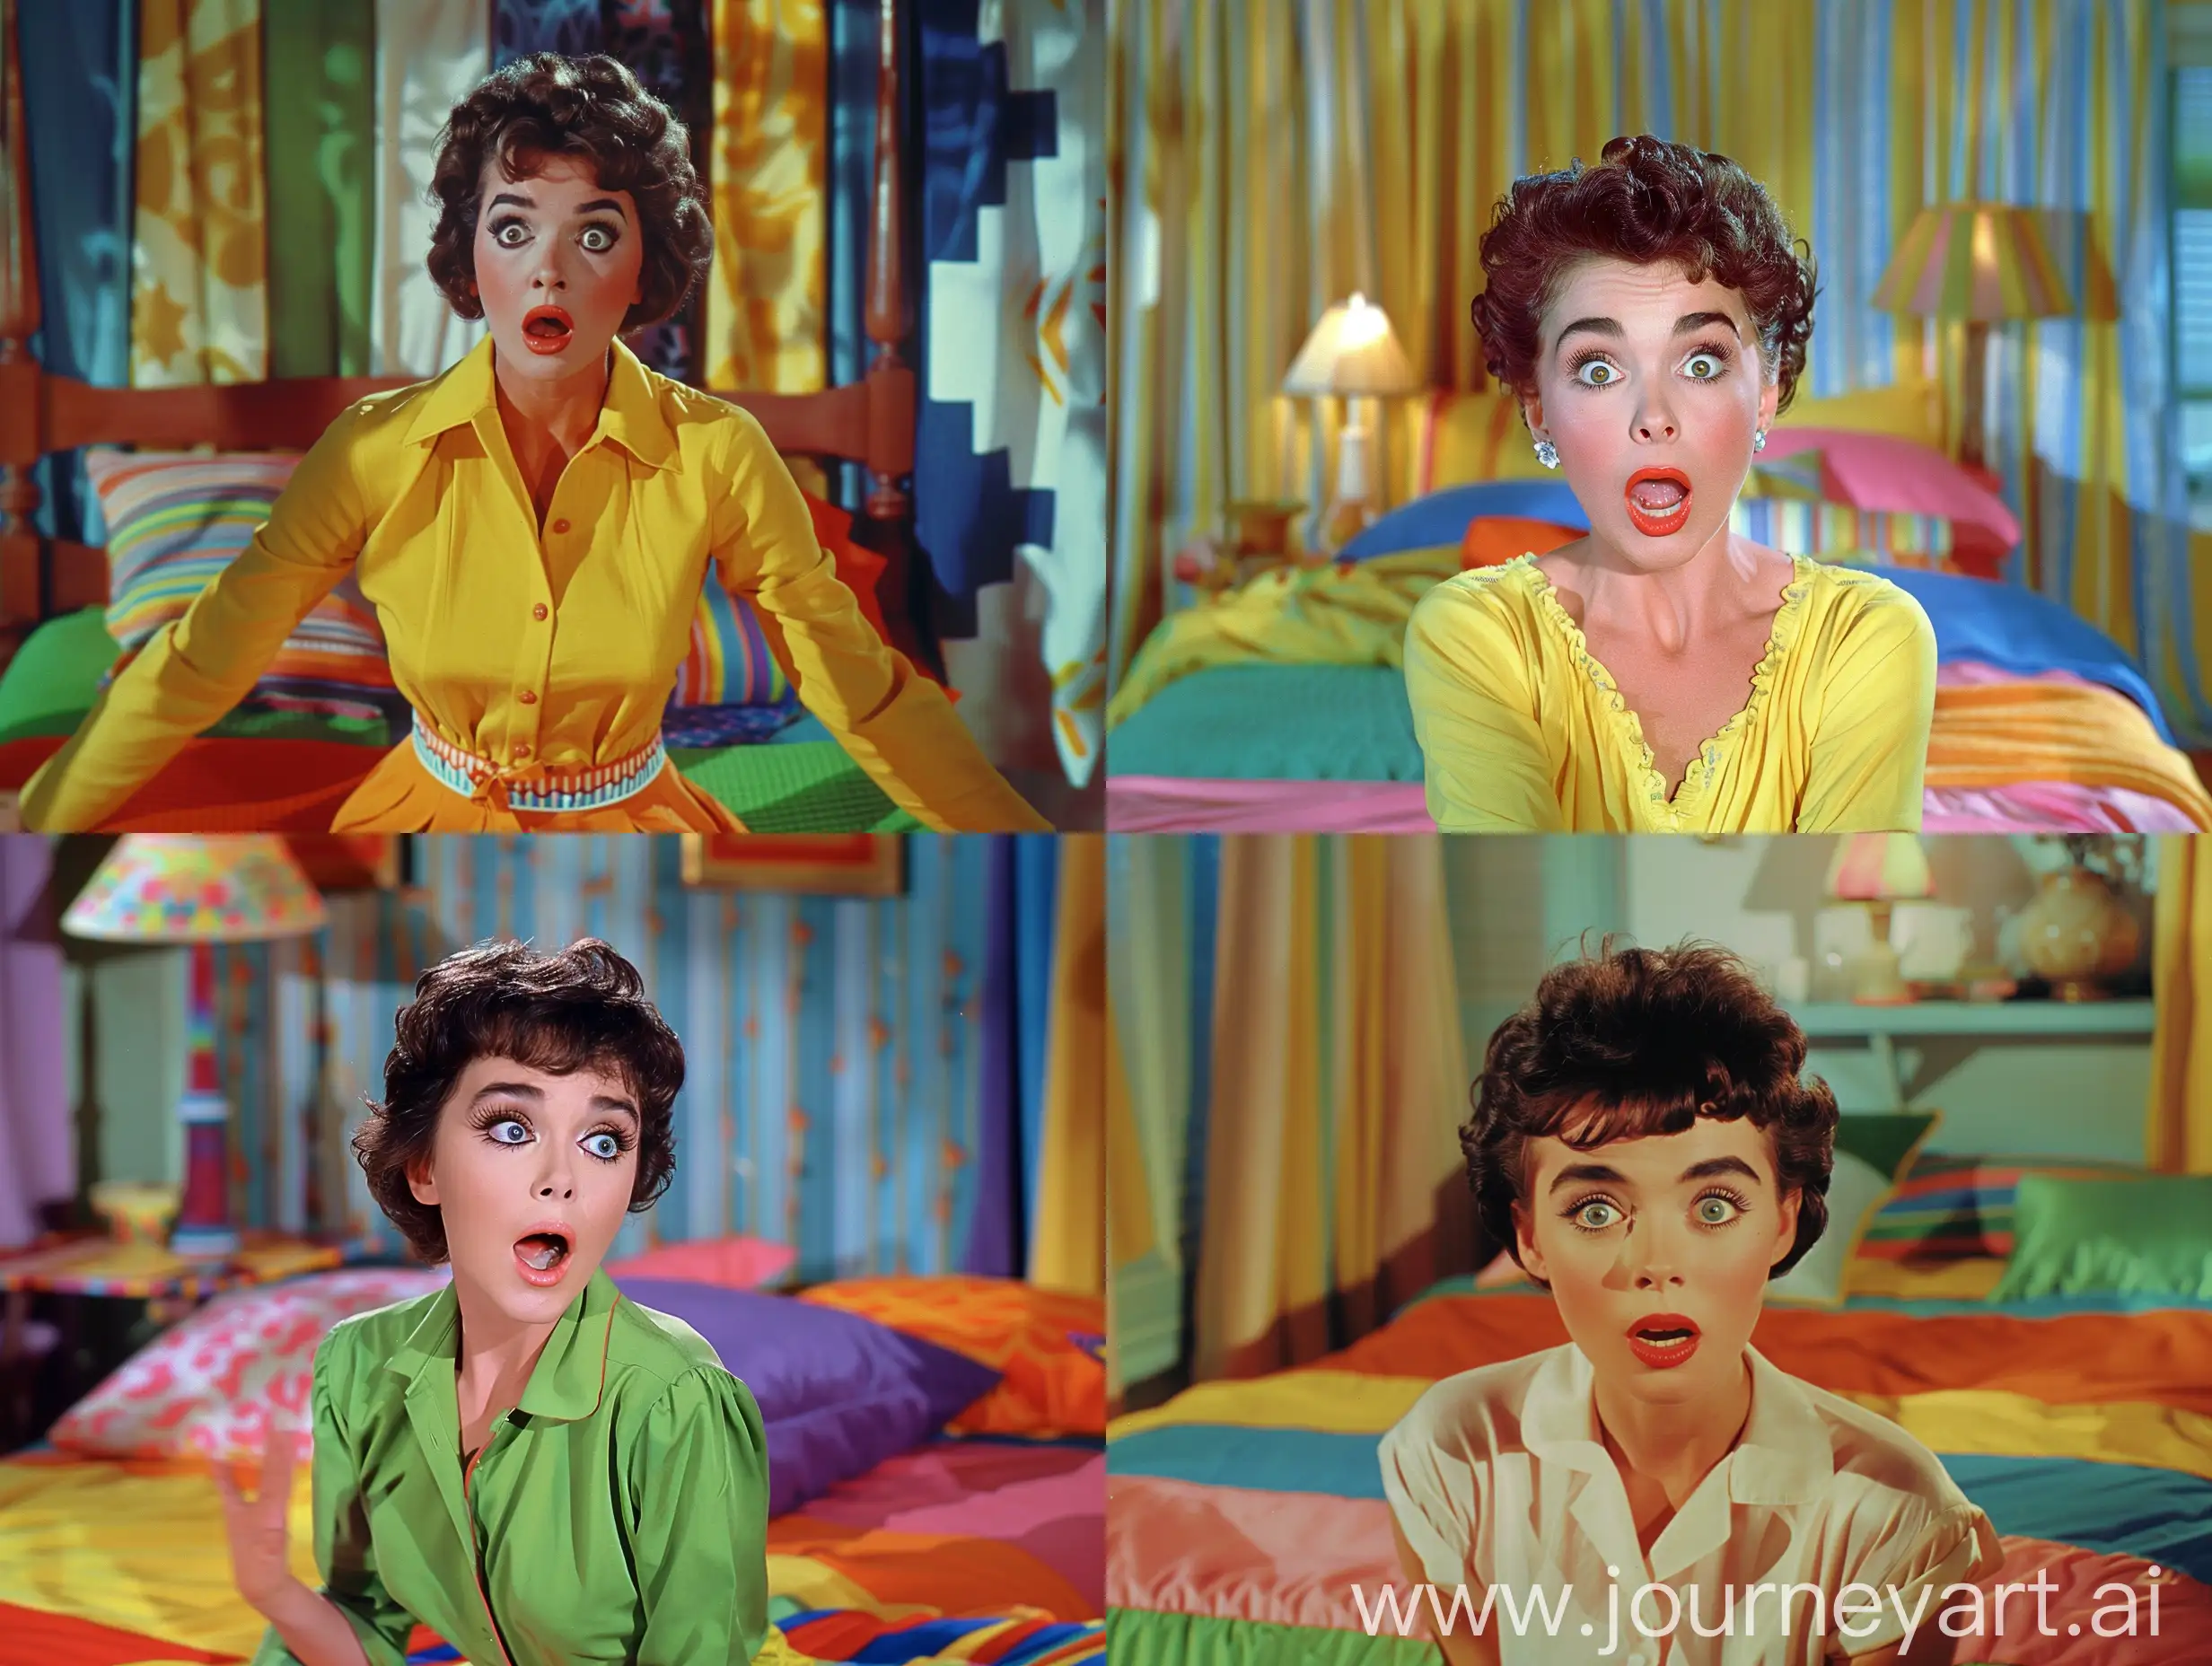 Elizabeth Taylor with a surprised face. Front view. close ups. He is sitting on a colorful bed..Super Panavision 70s 1950s, color picture, vintage quality